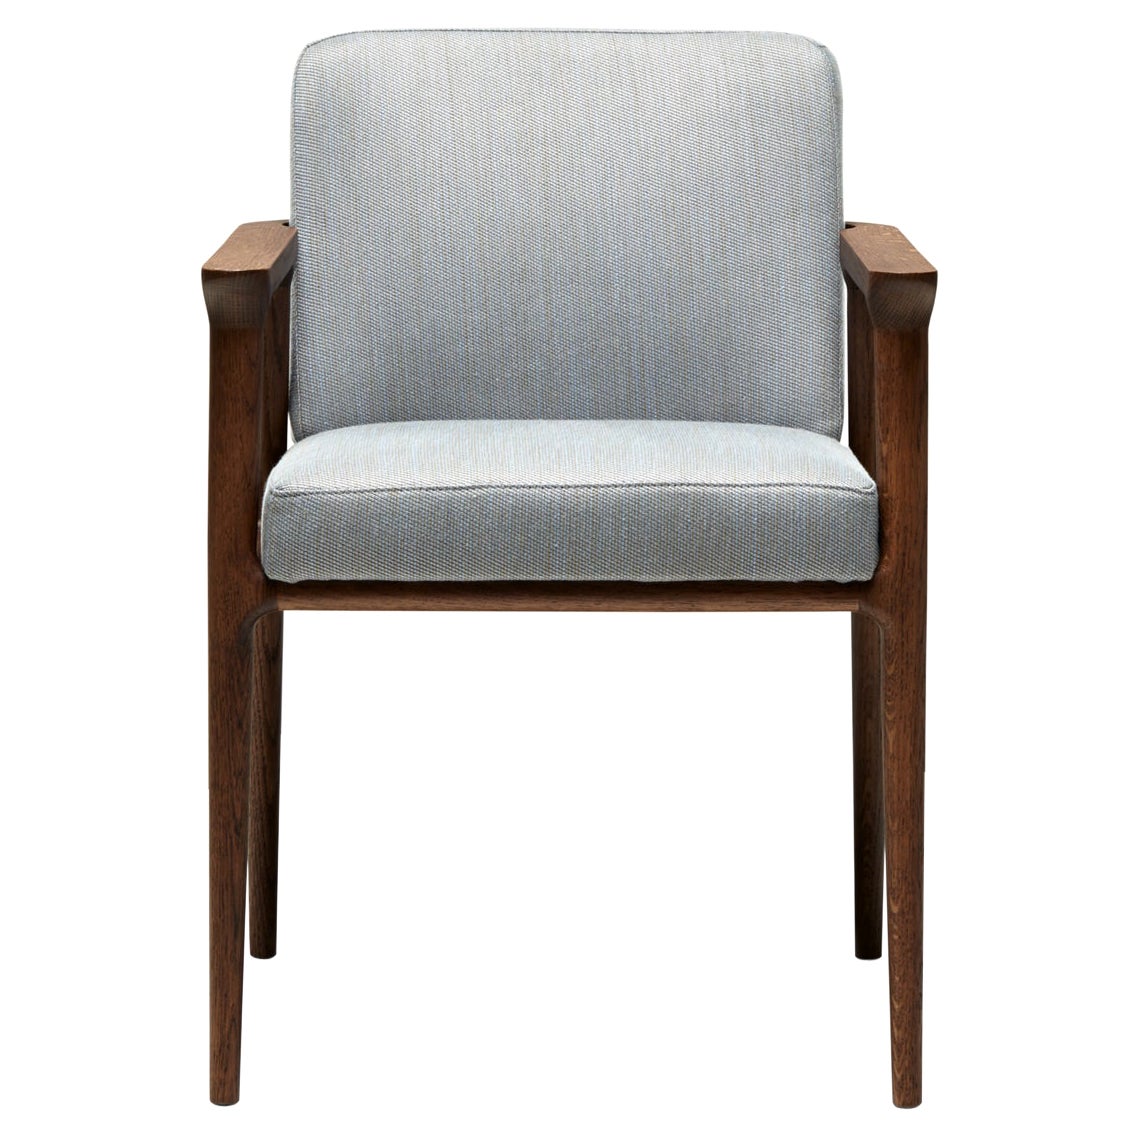 Moooi Zio Dining Chair in Griffin Upholstery with Oak Stained Cinnamon Frame For Sale